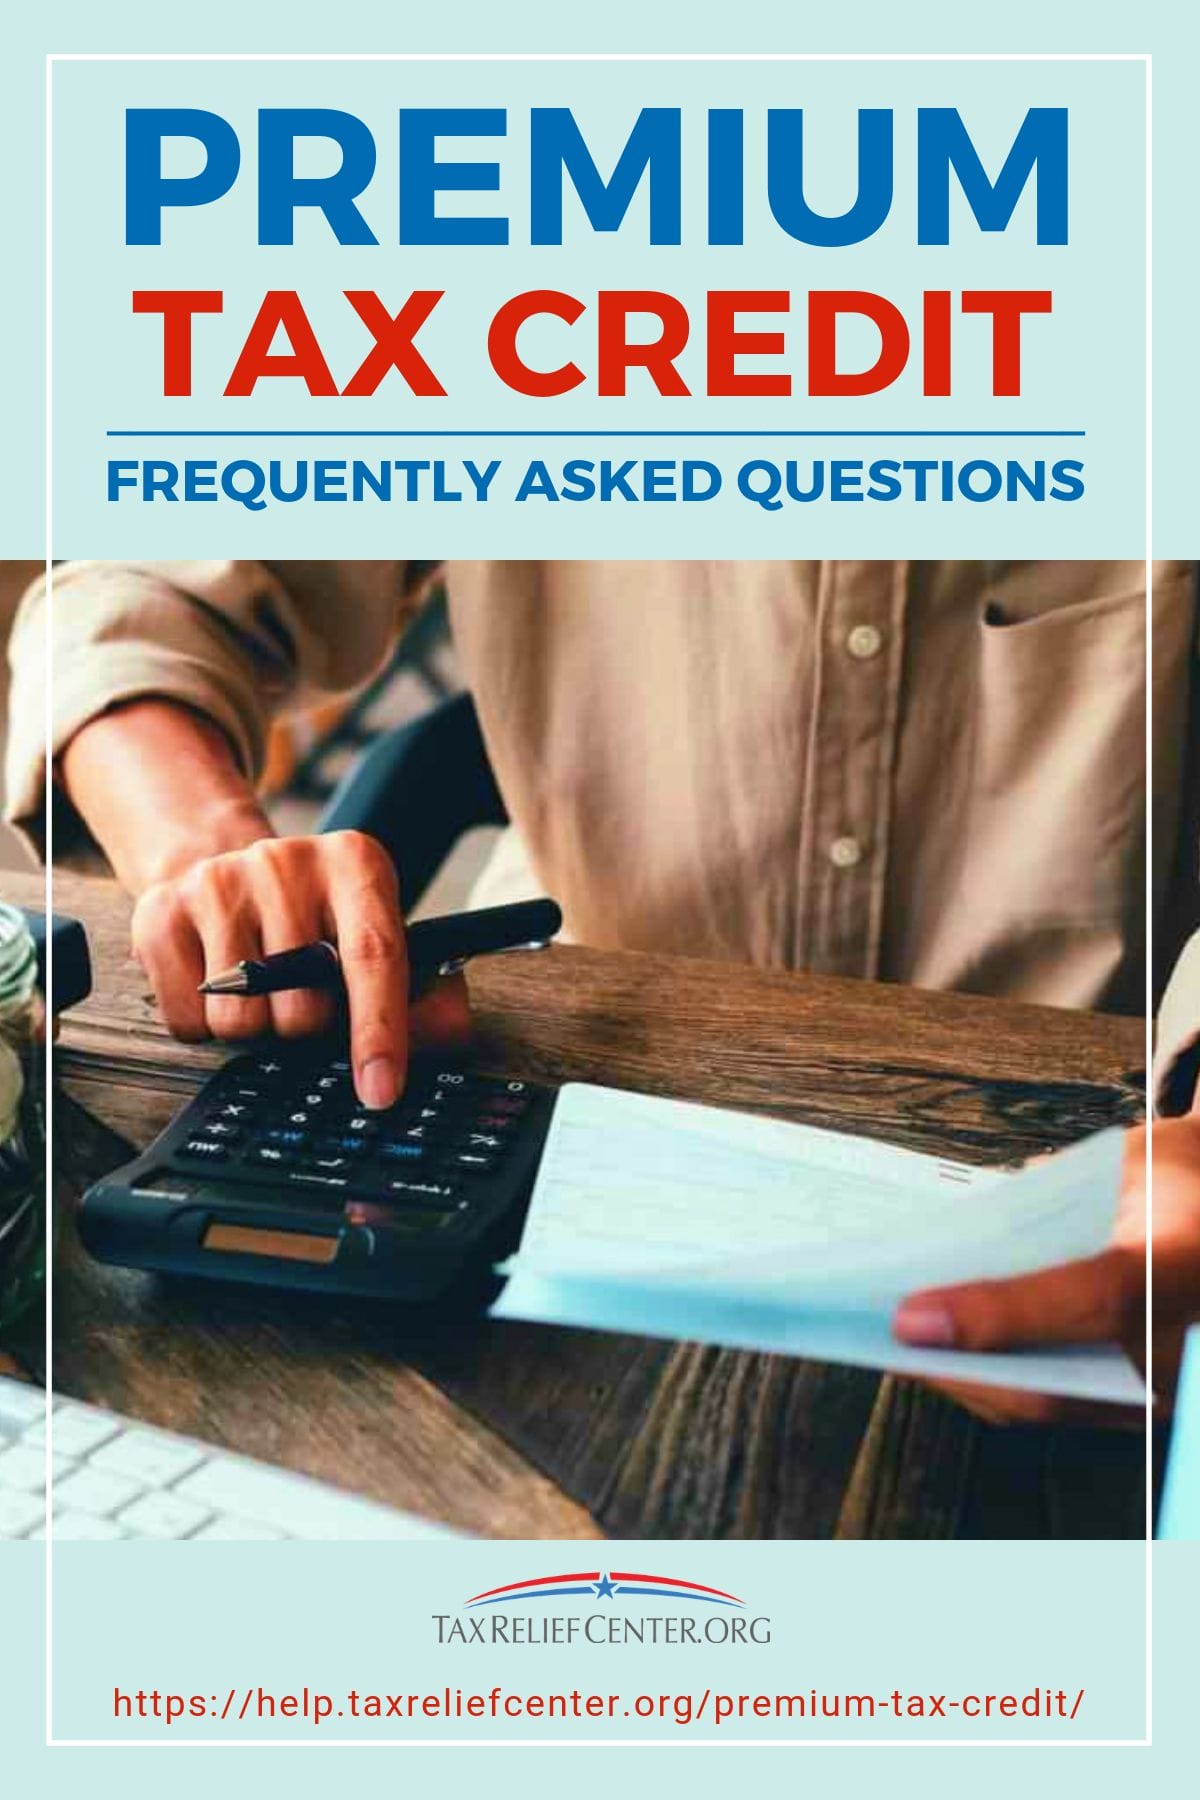 Premium Tax Credit Frequently Asked Questions https://help.taxreliefcenter.org/premium-tax-credit/